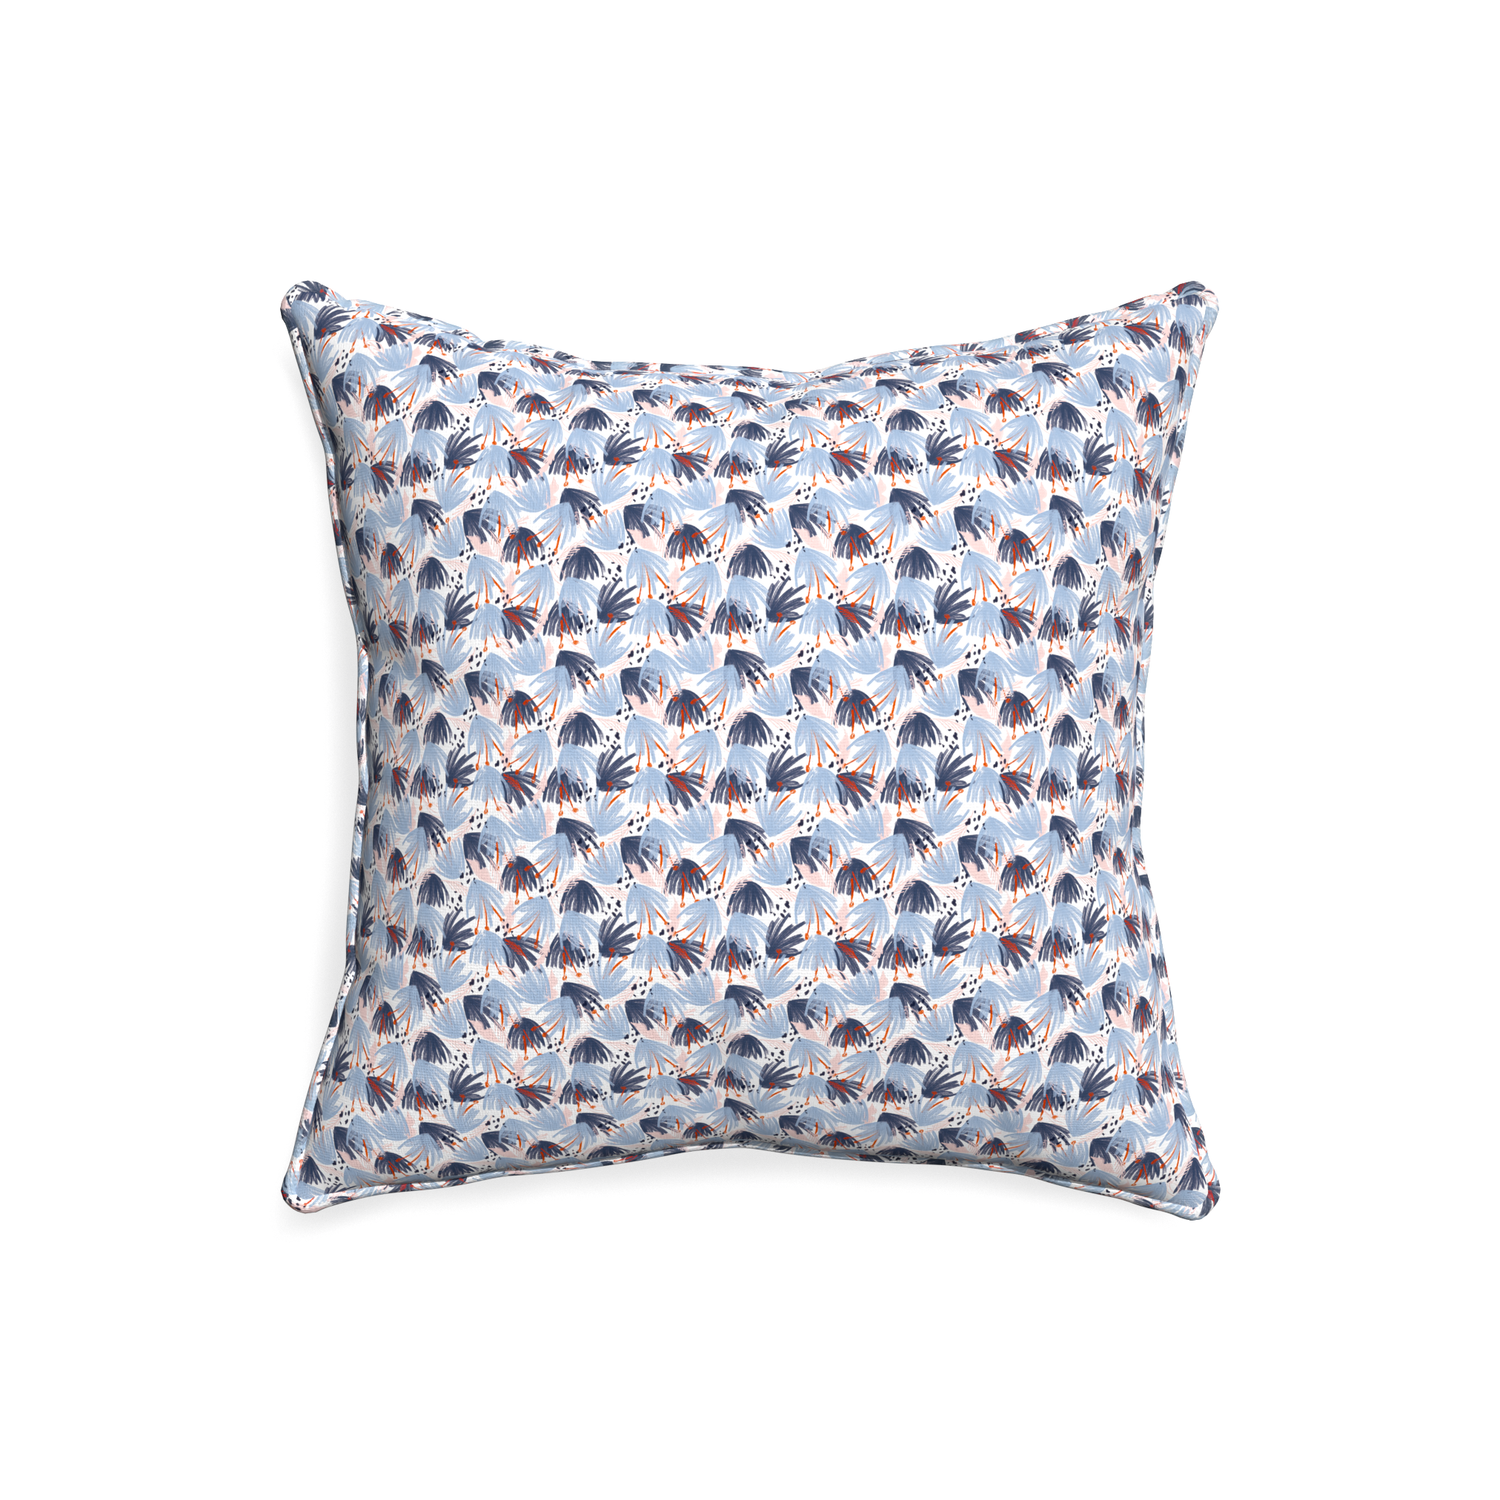 20-square eden blue custom pillow with e piping on white background